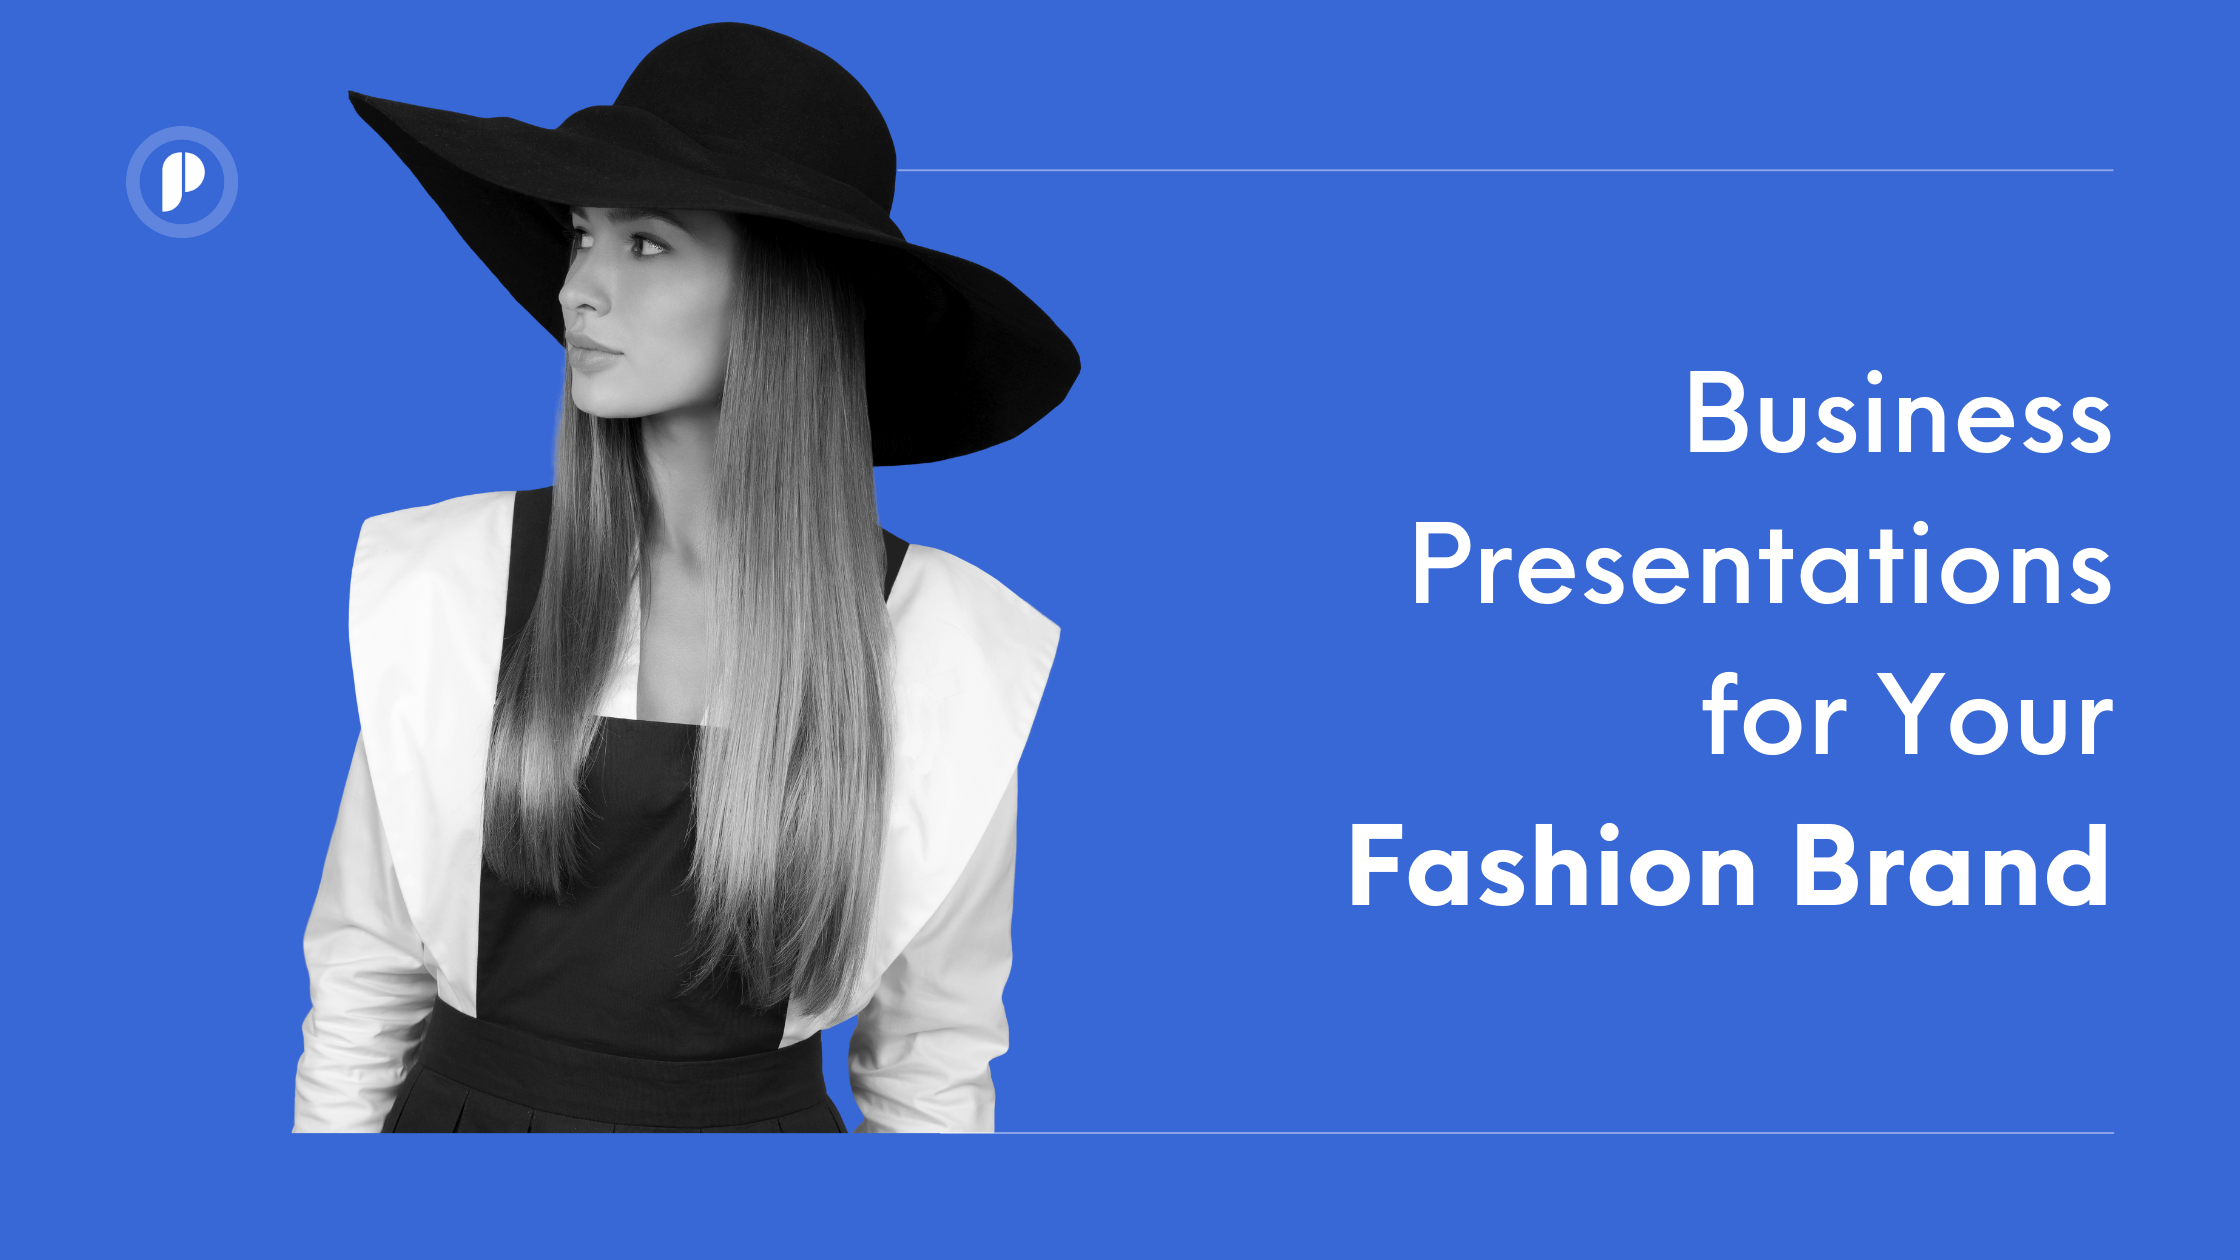 5 Types of Business Presentations for Your Fashion Brand You Must Know